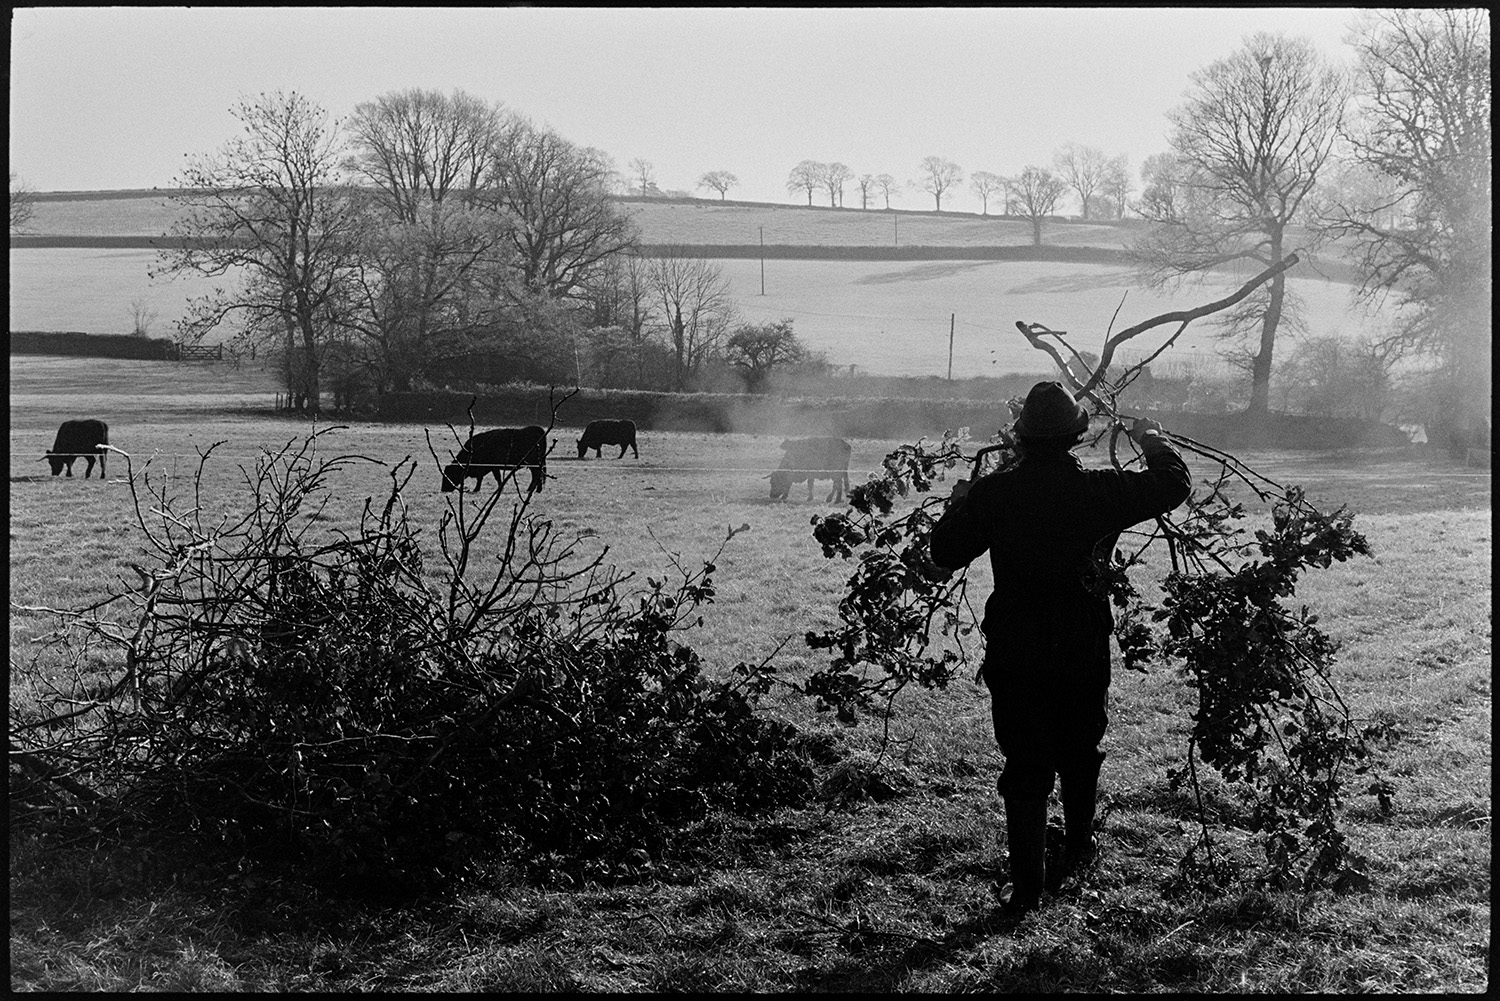 Farmer burning hedge clippings. 
[Stephen Squire burning hedge trimmings in a field at Lower Langham, Dolton. Cattle are grazing in the background.]